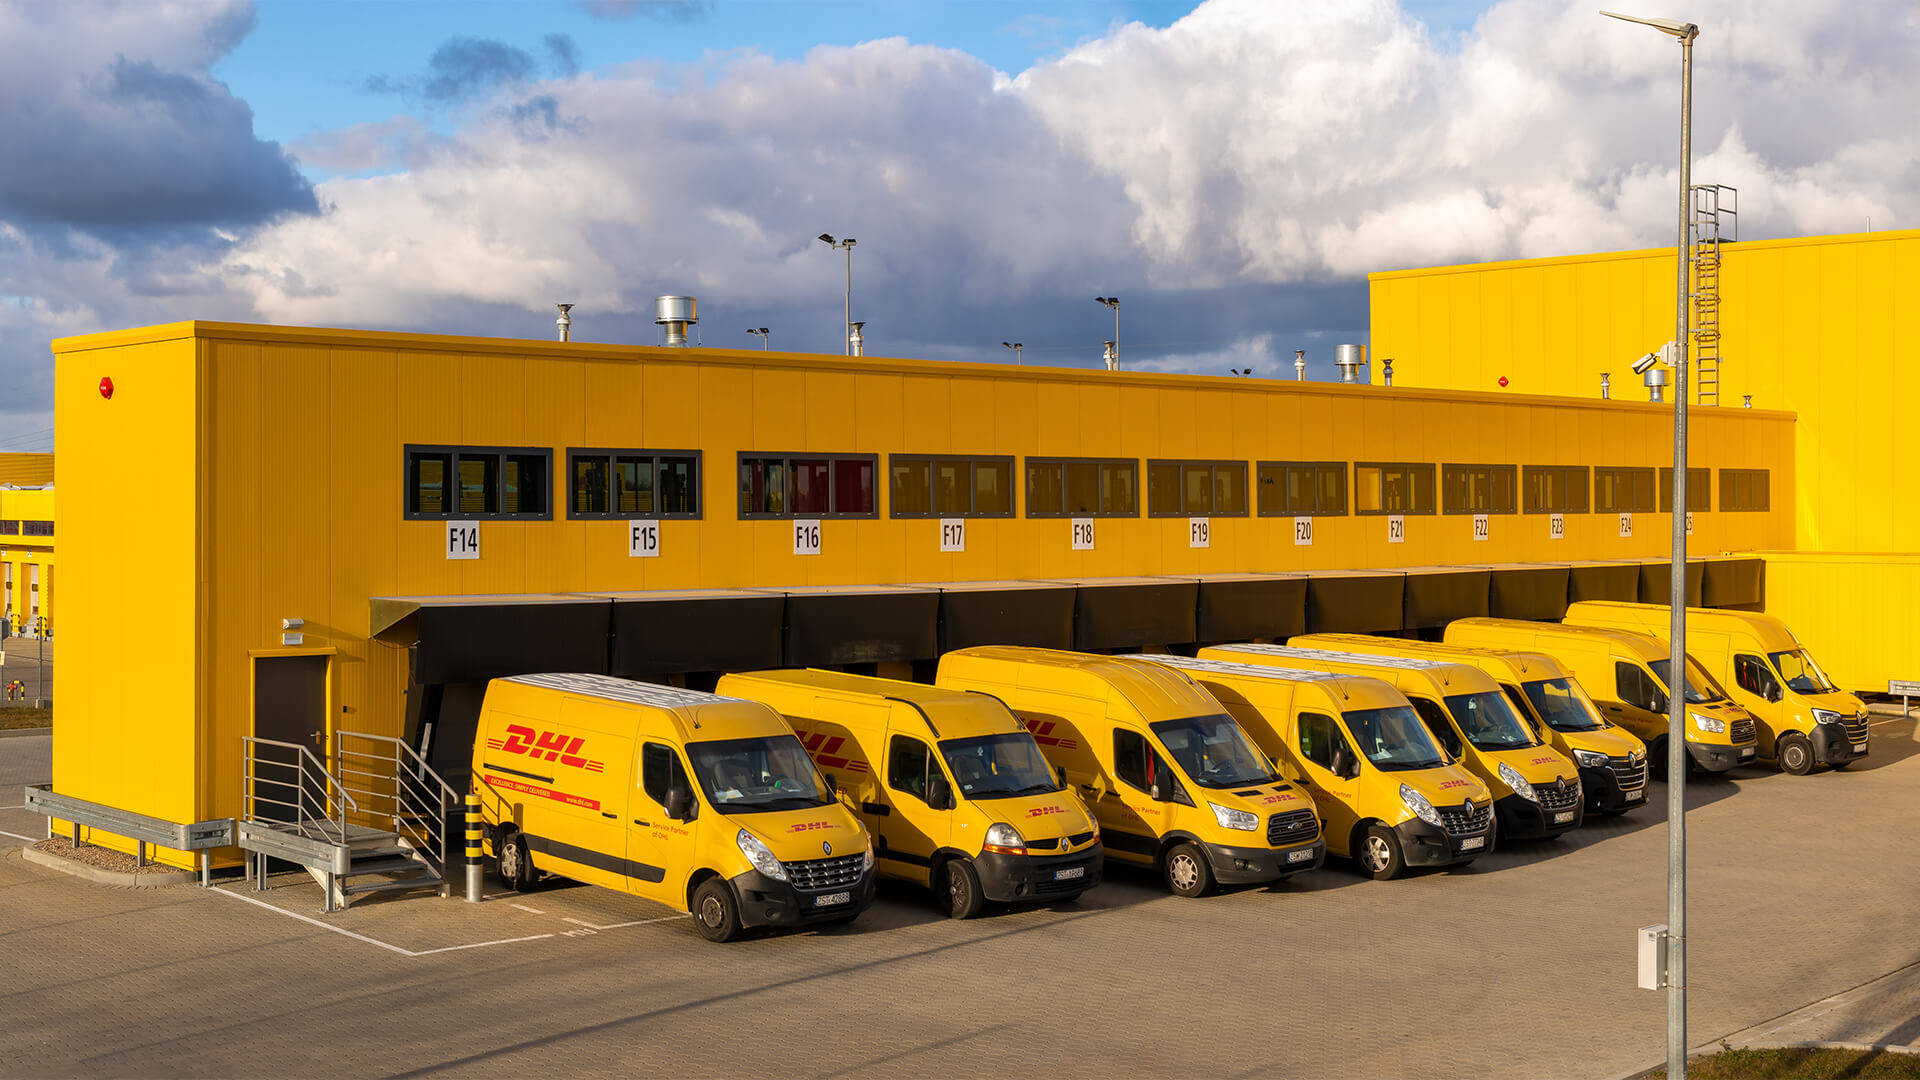 Caption: A Dhl Delivery Van In A Parking Area